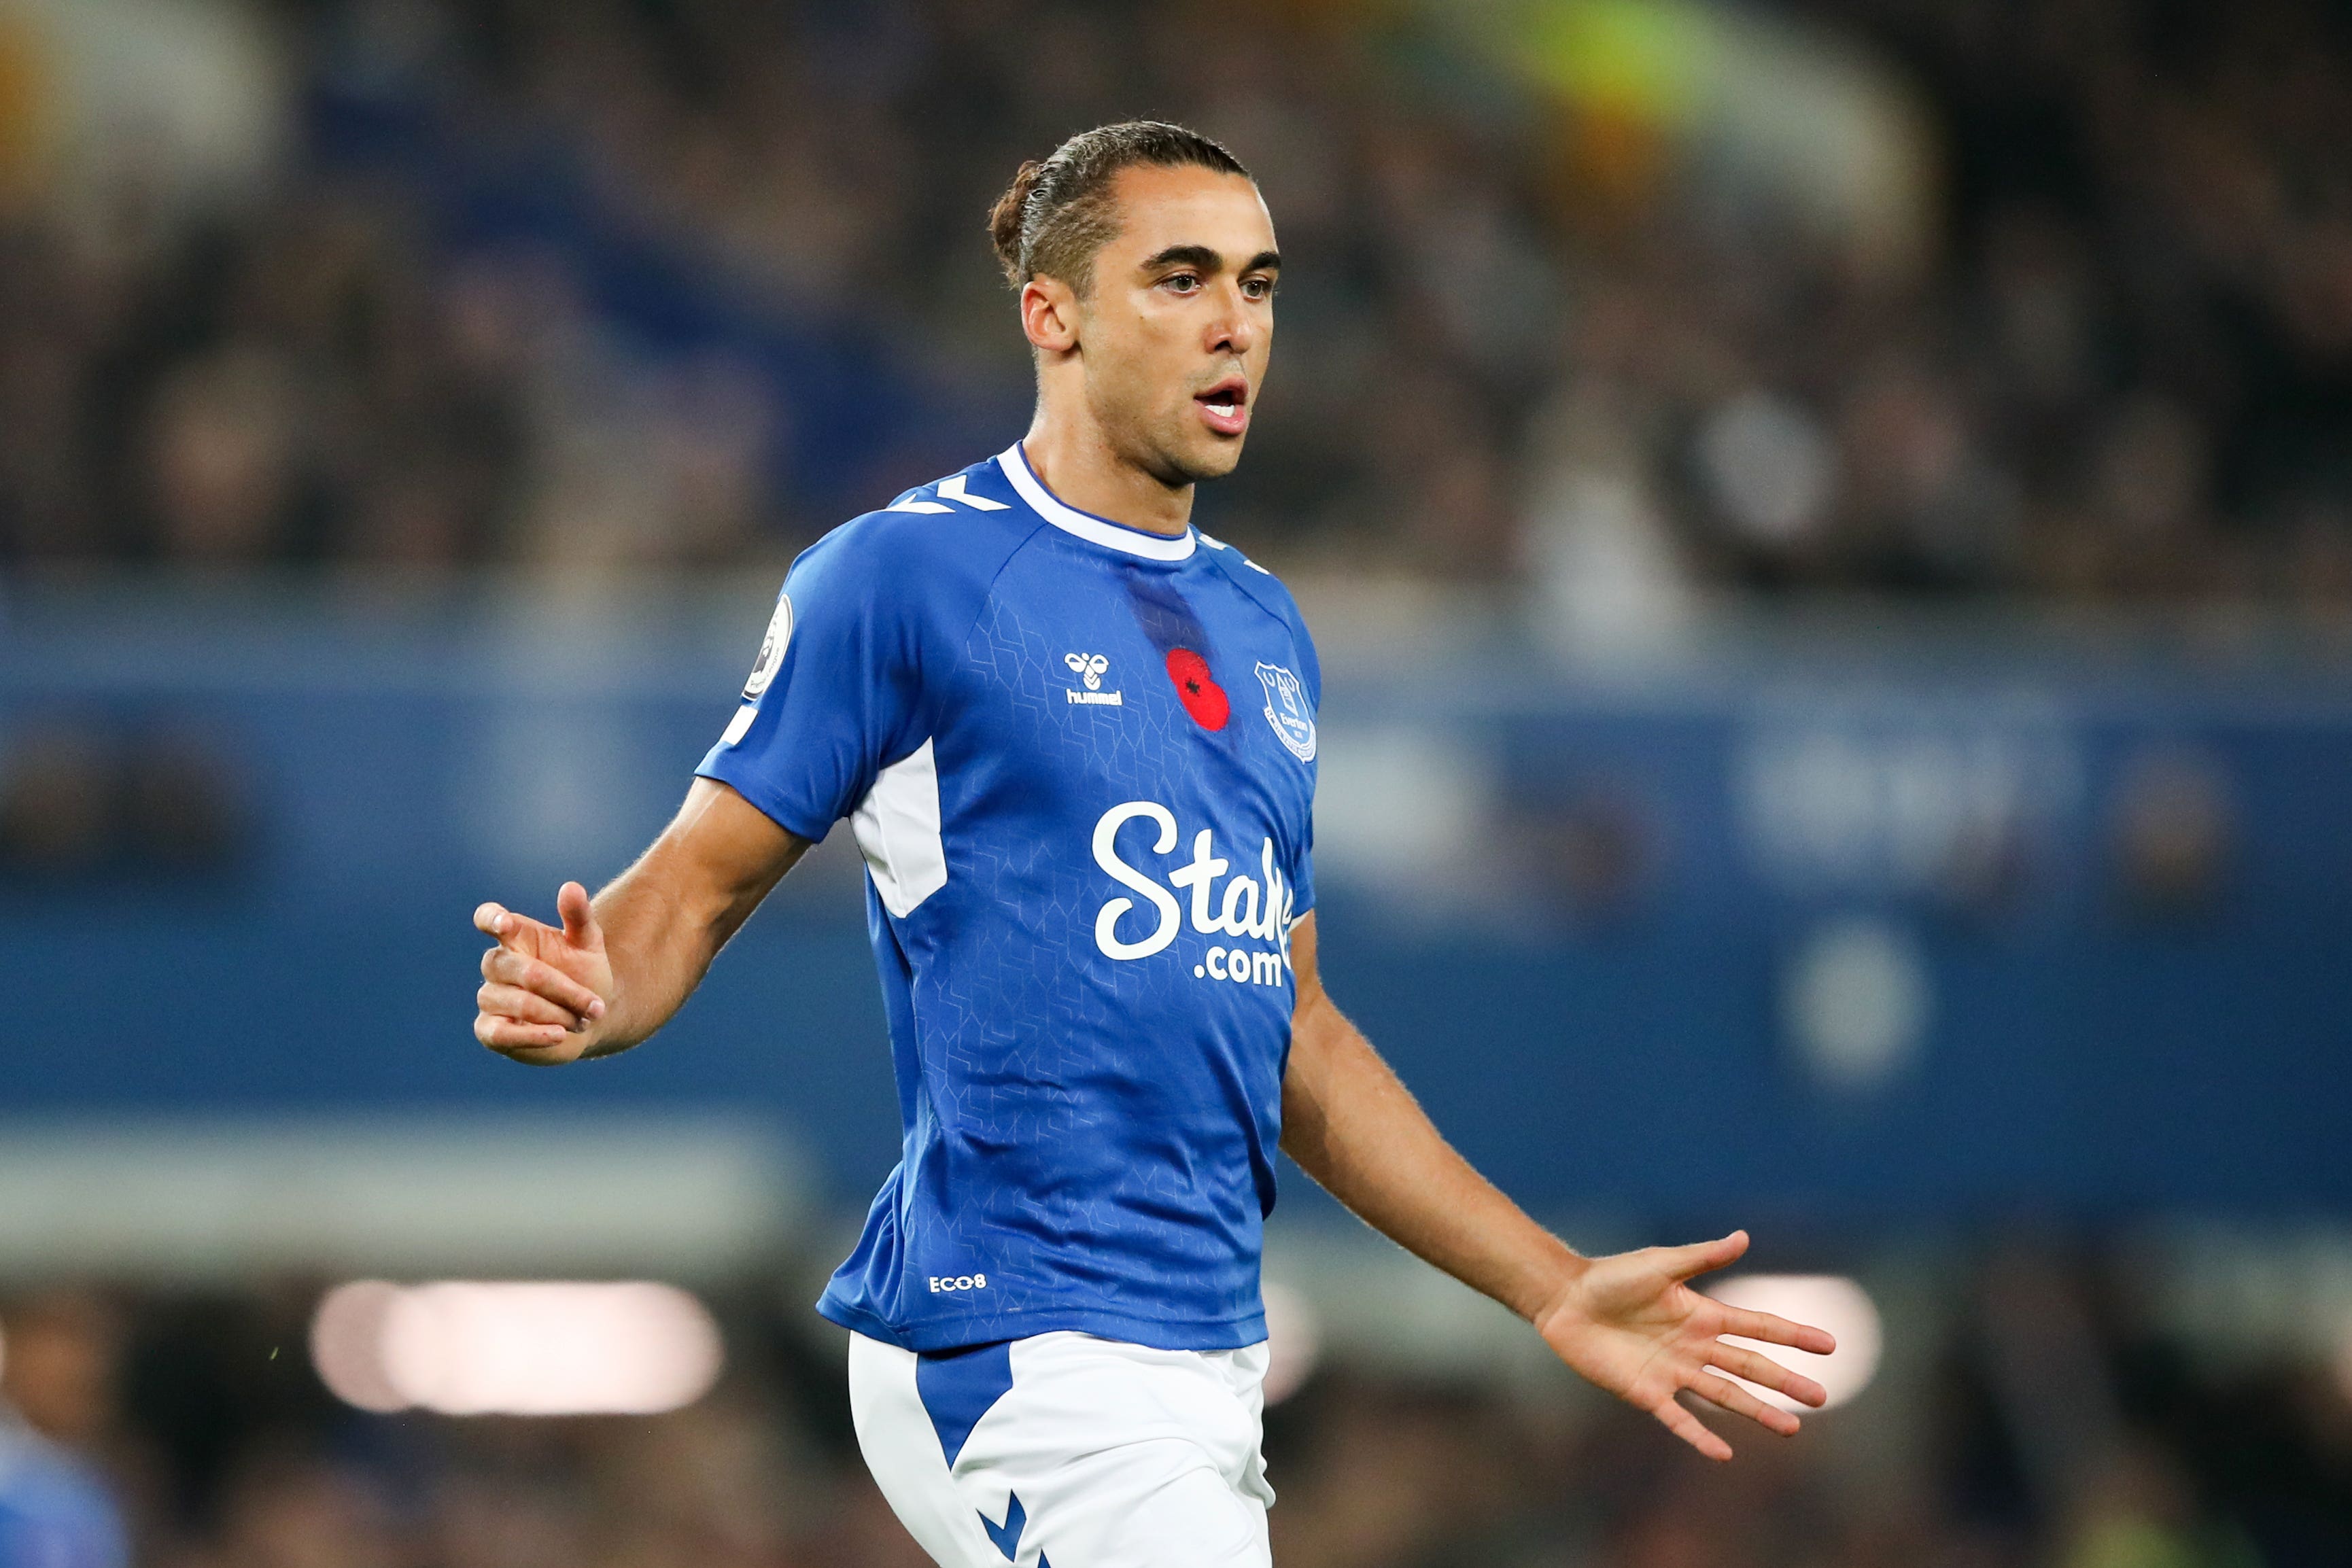 Dominic Calvert-Lewin has been included in the Everton squad (Isaac Parkin/PA)